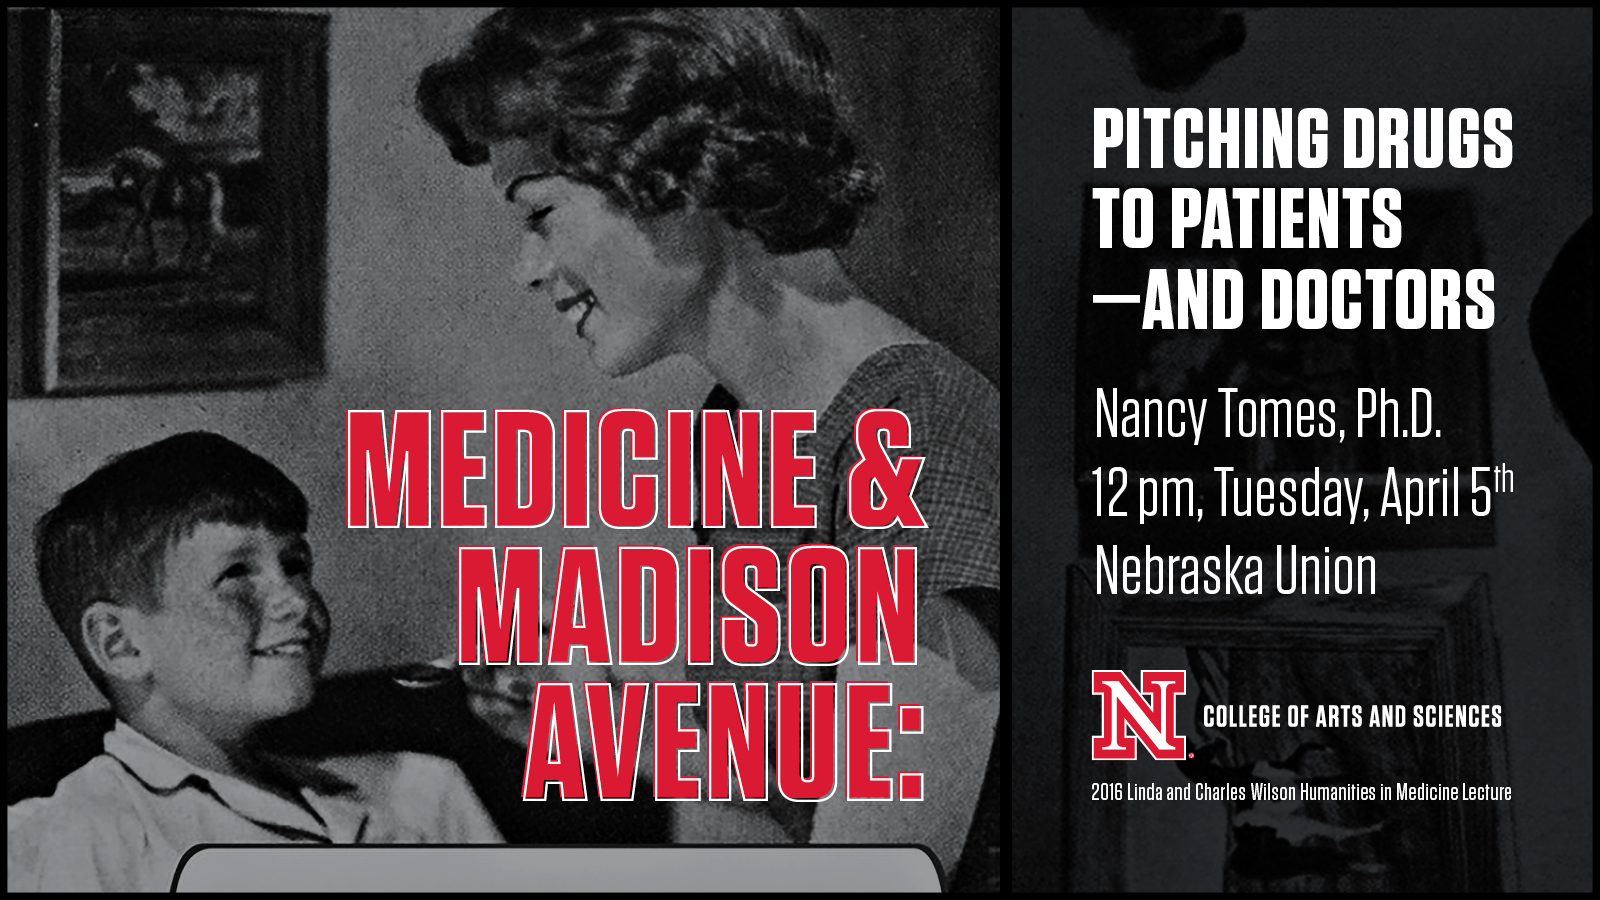 Photo Credit: Medicine & Madison Avenue: Pitching Drugs to Patients and Doctors